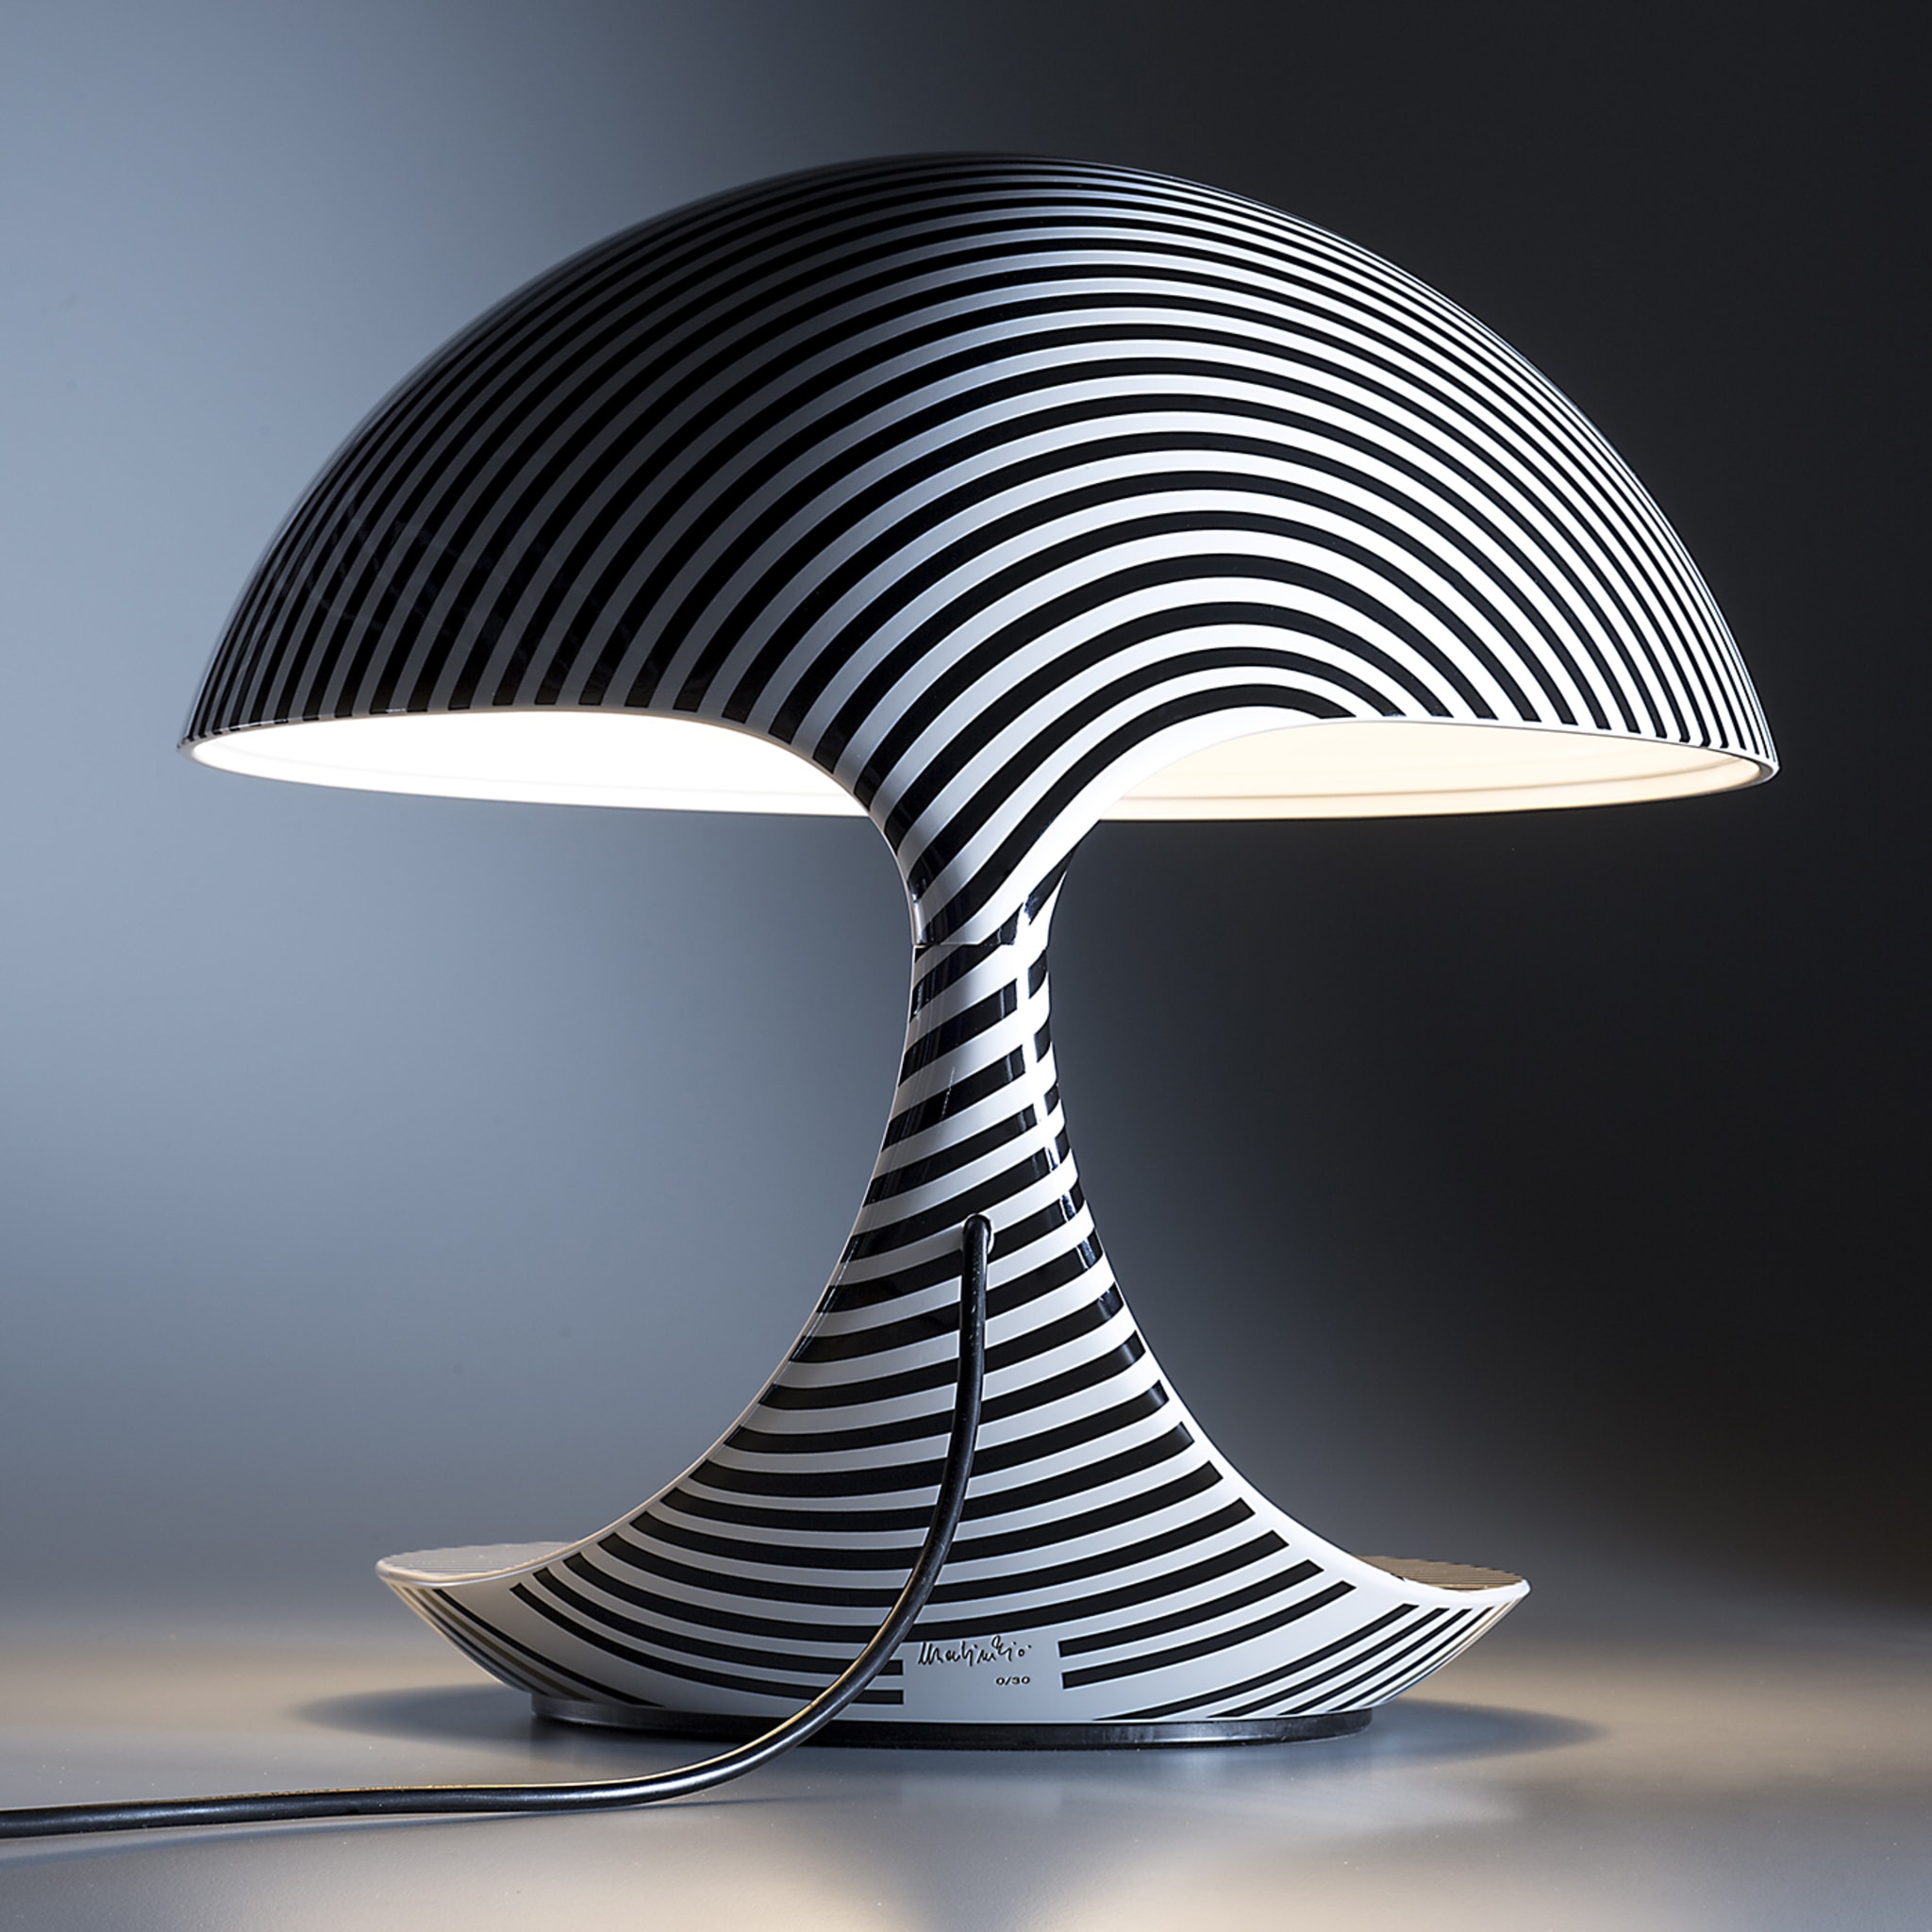 Cobra Texture Striped Table Lamp by Area 17 - Alternative view 3